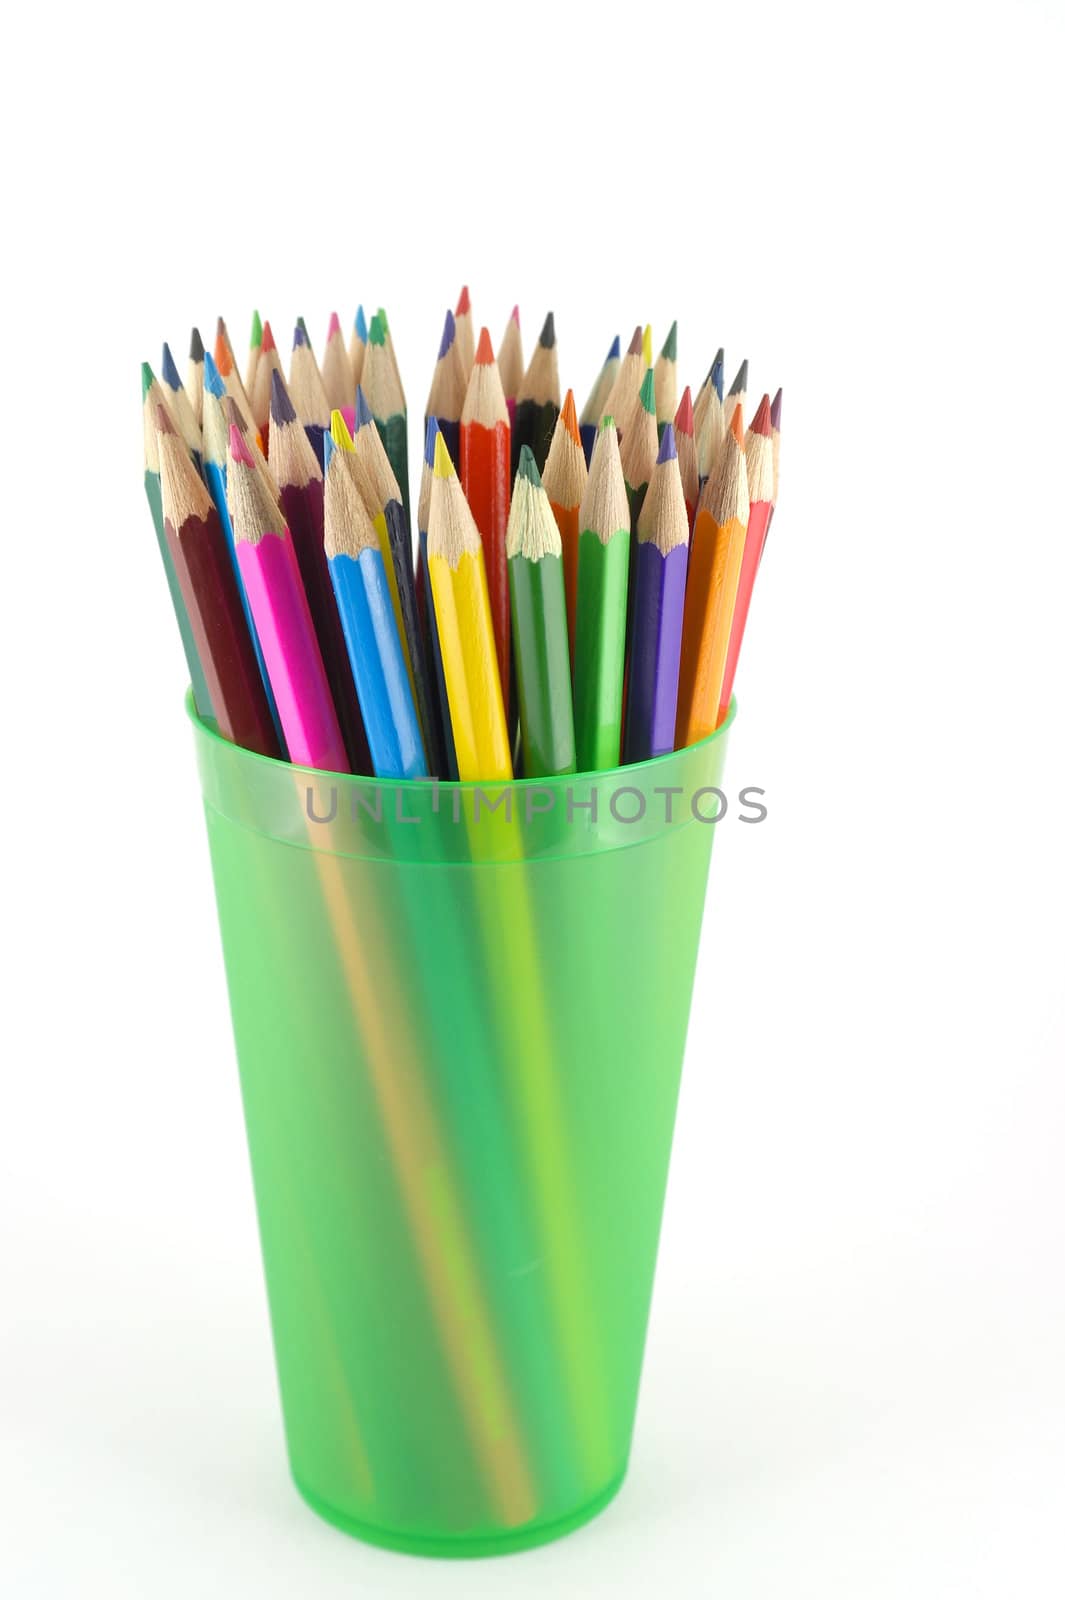 Color pencils in the green prop over white. Shallow DOF.